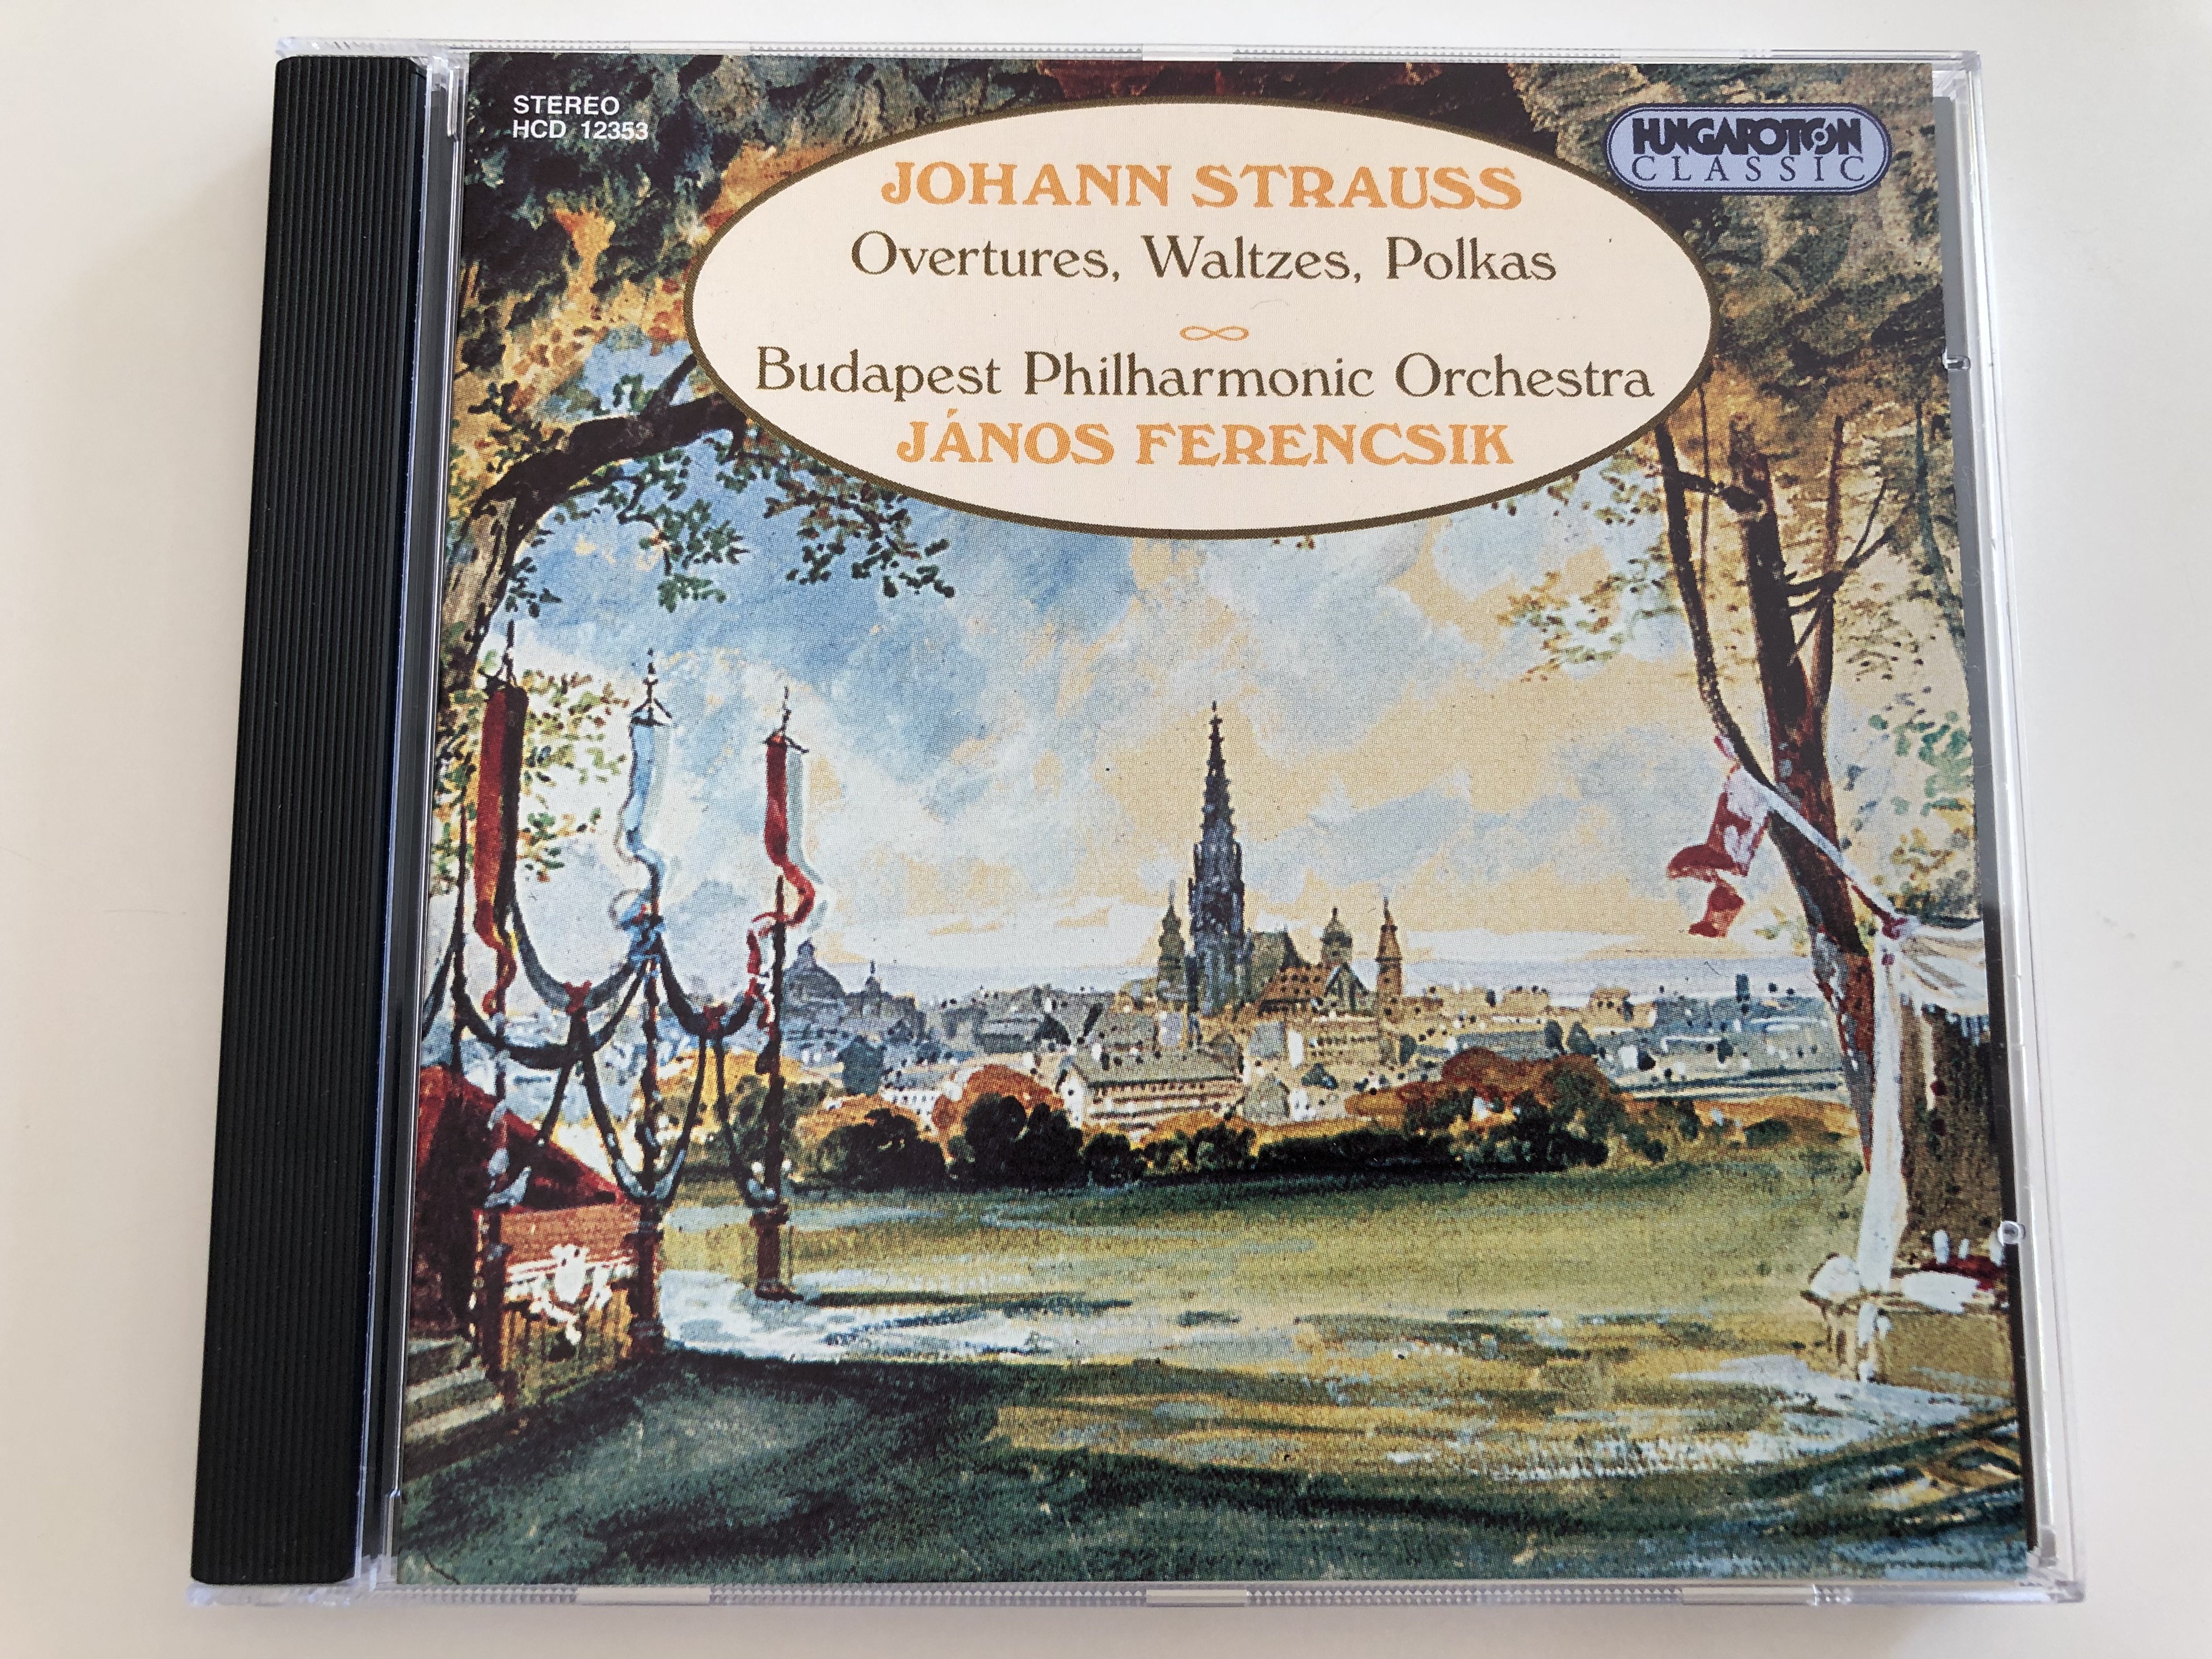 johann-strauss-overtures-waltzes-polkas-budapest-philharmonic-orchestra-conducted-by-j-nos-ferencsik-hungarton-classic-audio-cd-1996-hcd-12353-1-.jpg